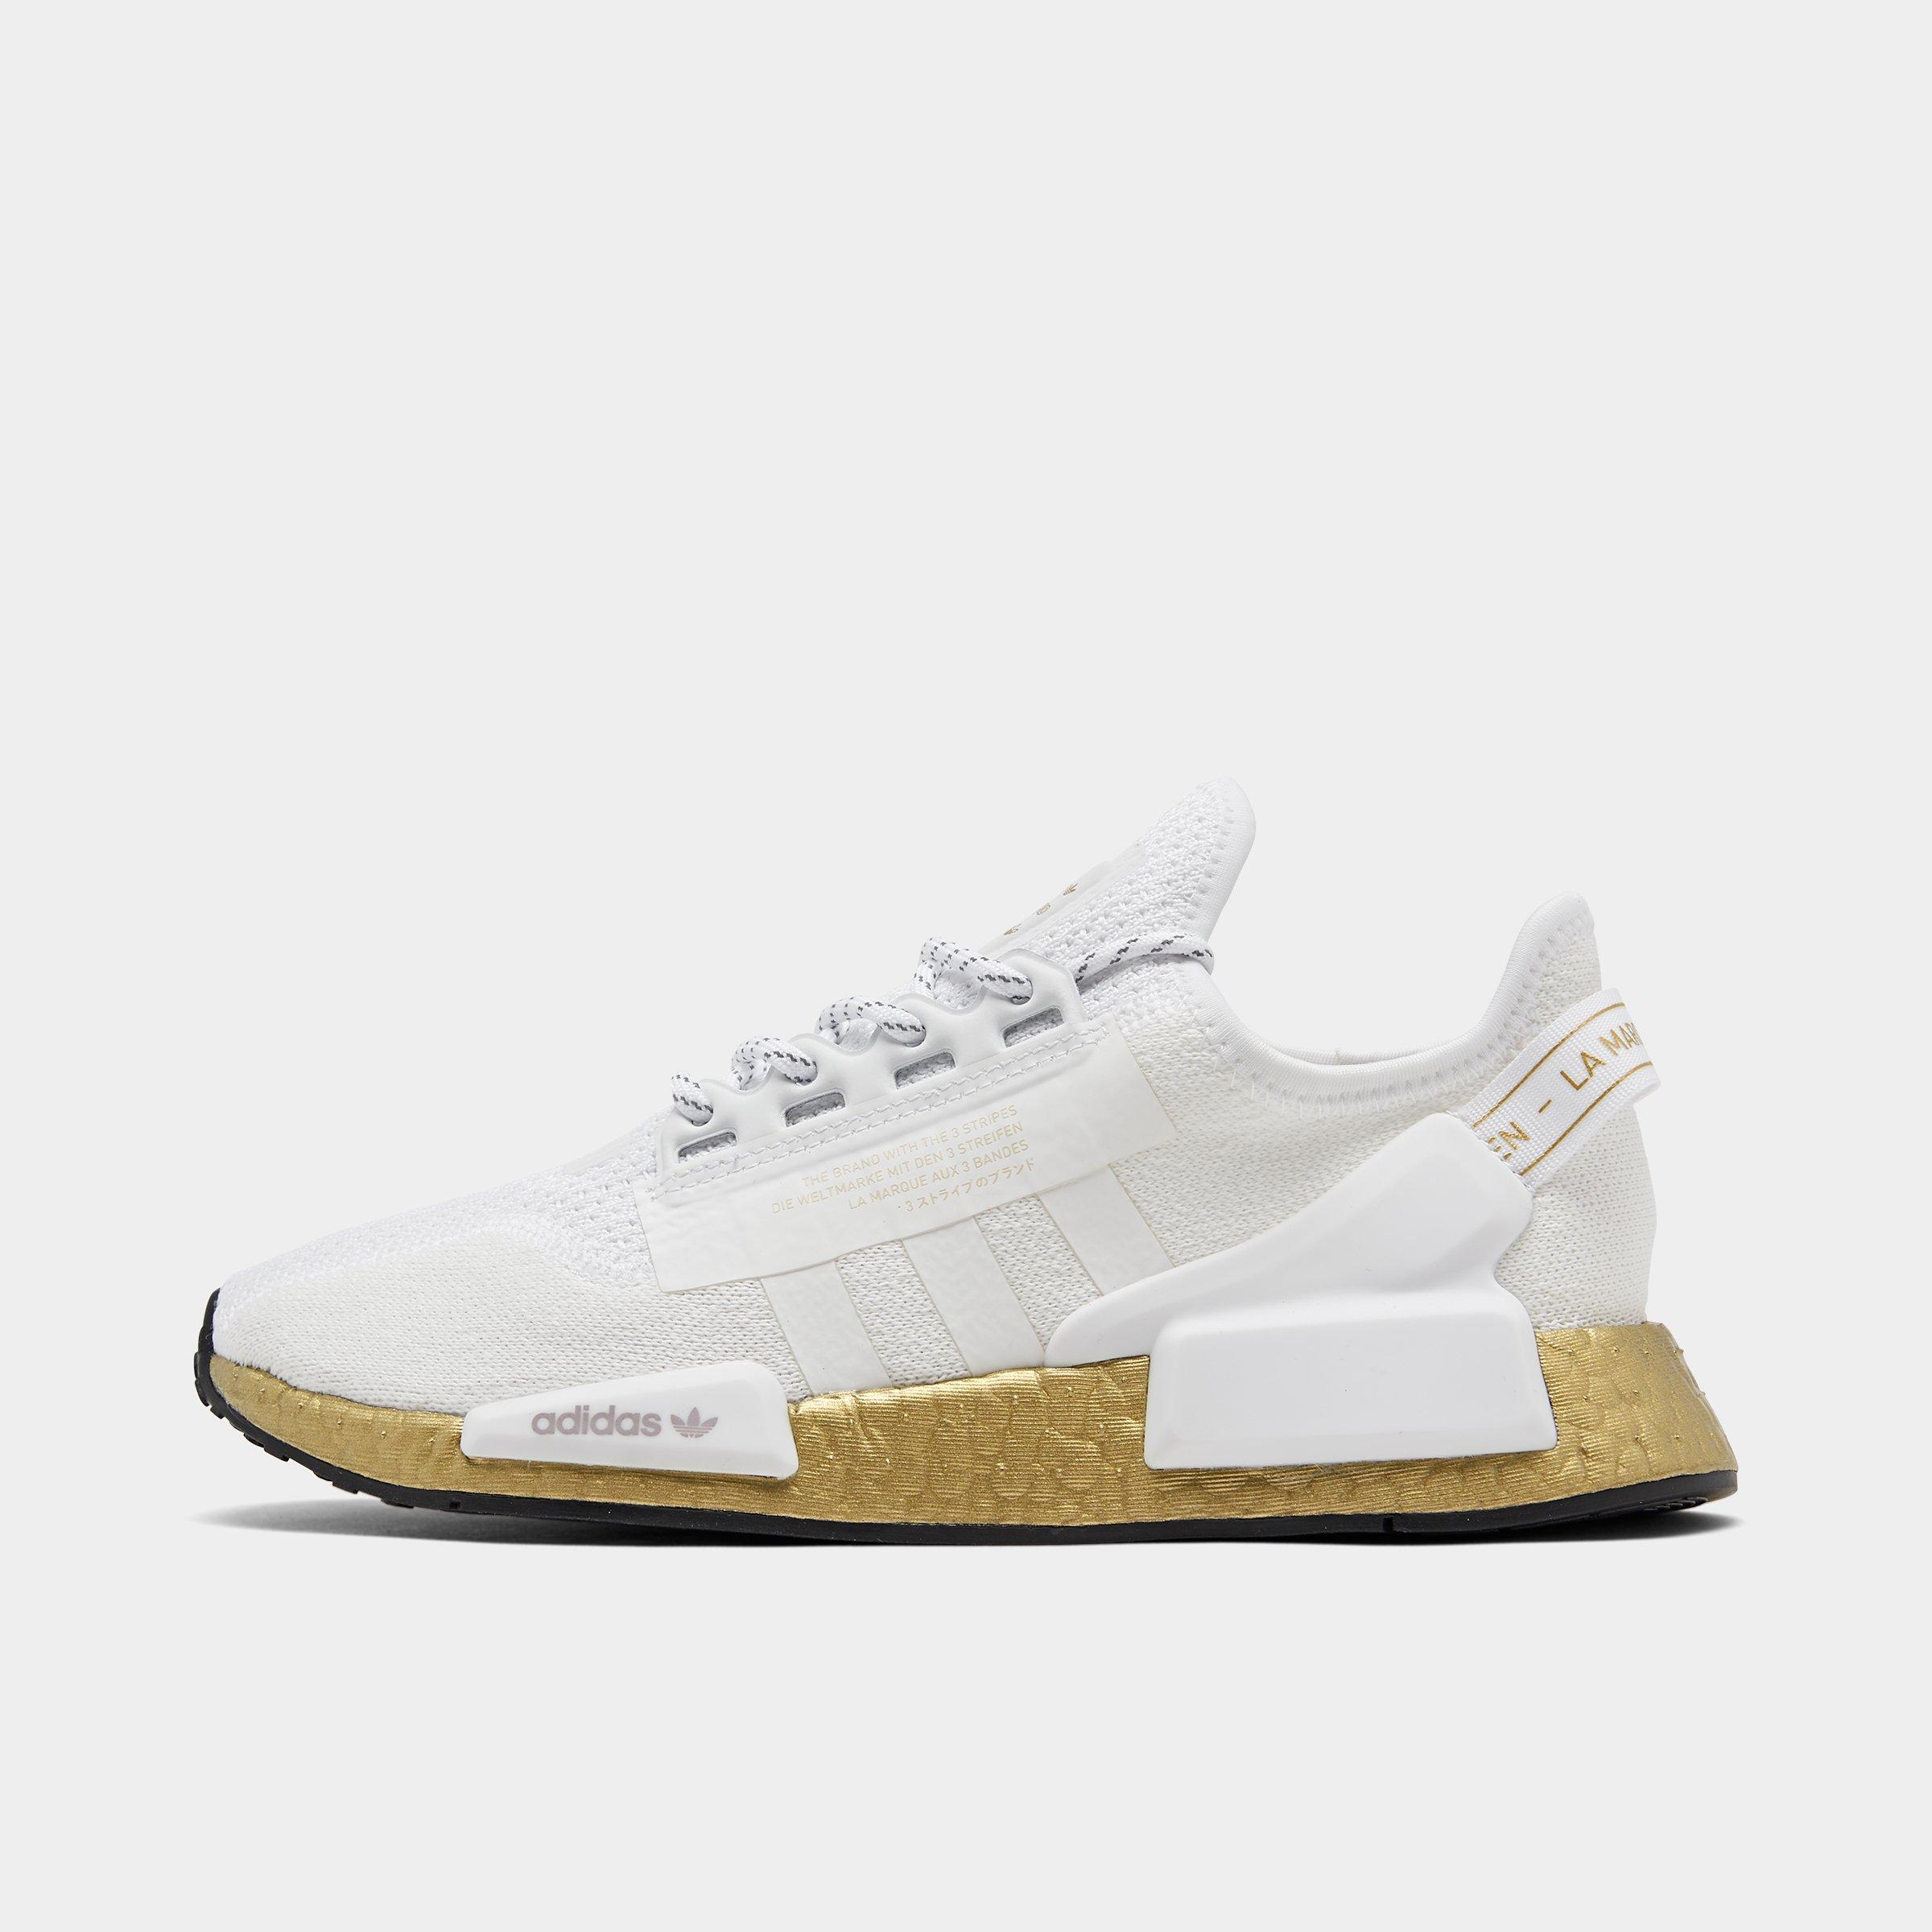 Adidas NMD R1 White Gray Pinterest Shoes